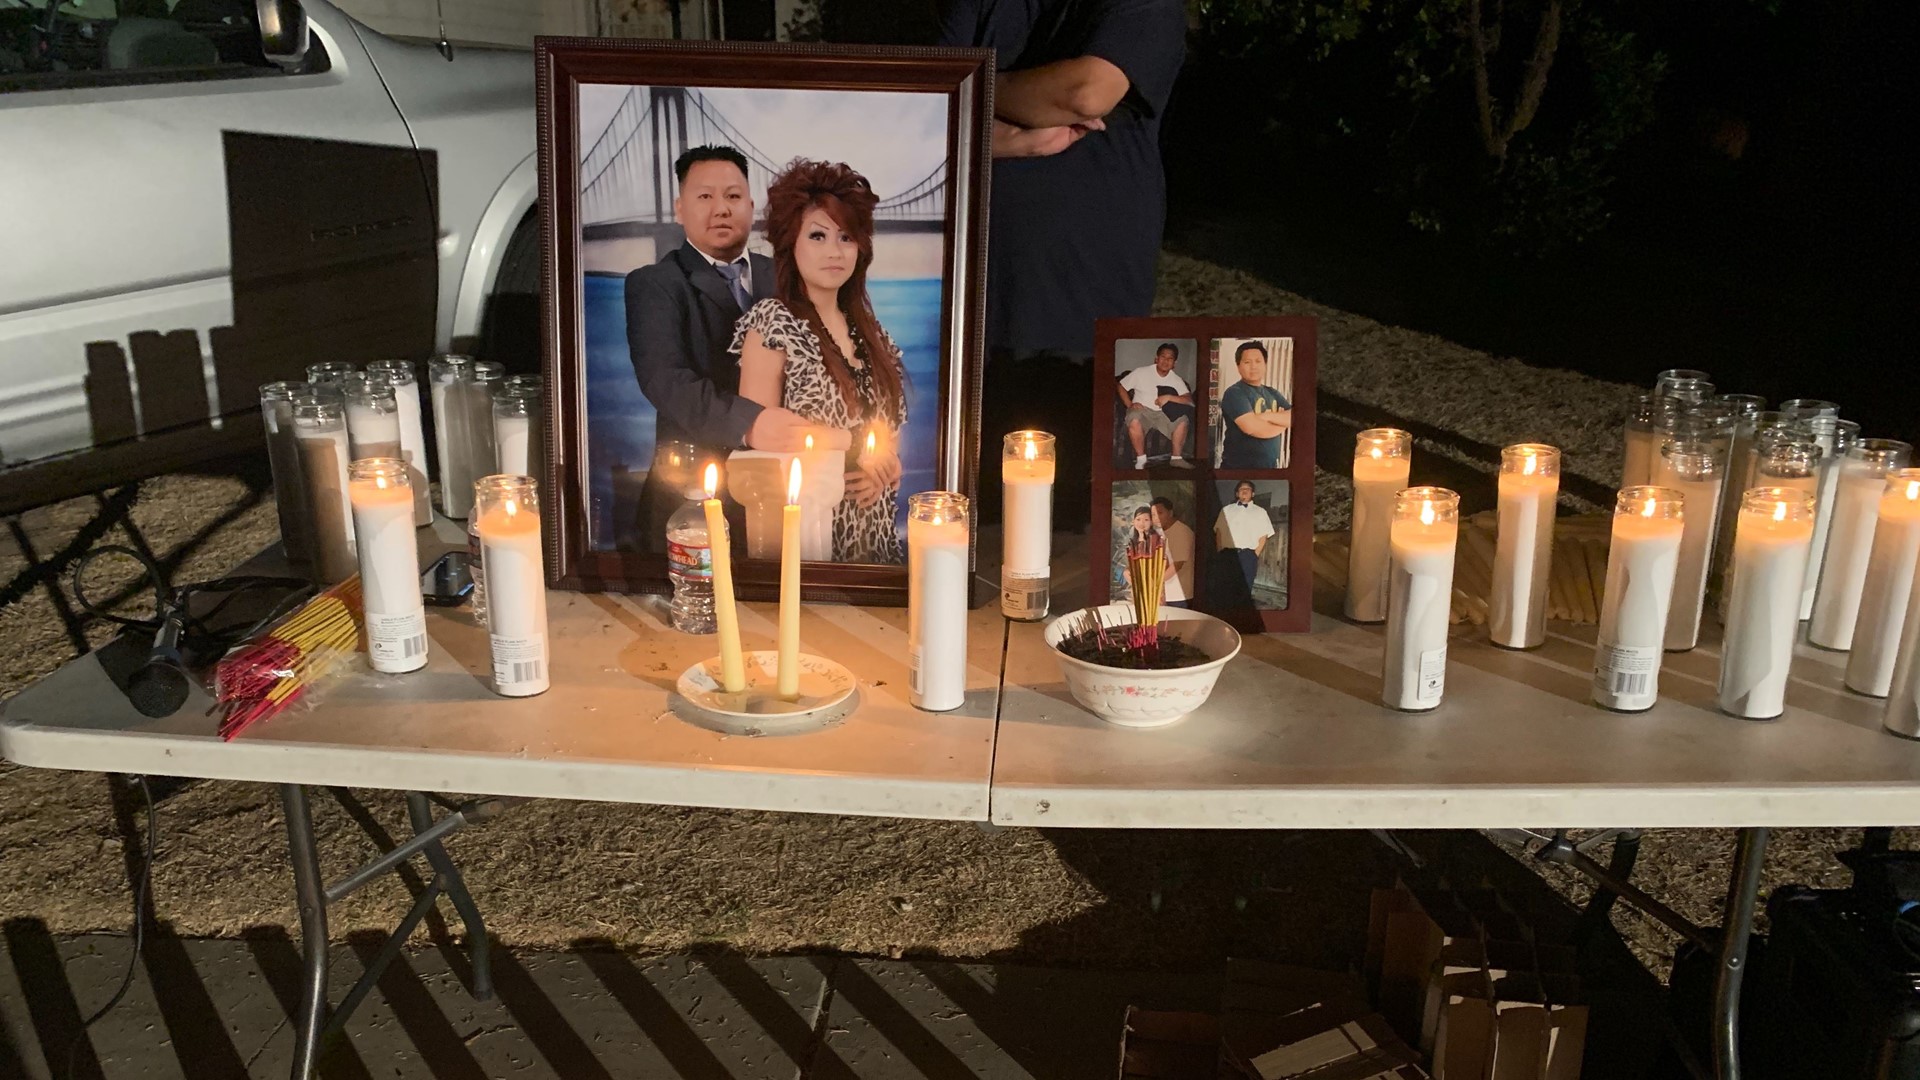 A family in Fresno looking for answers after 10 people were shot, four of them killed, in what investigators are calling a targeted shooting on Sunday.